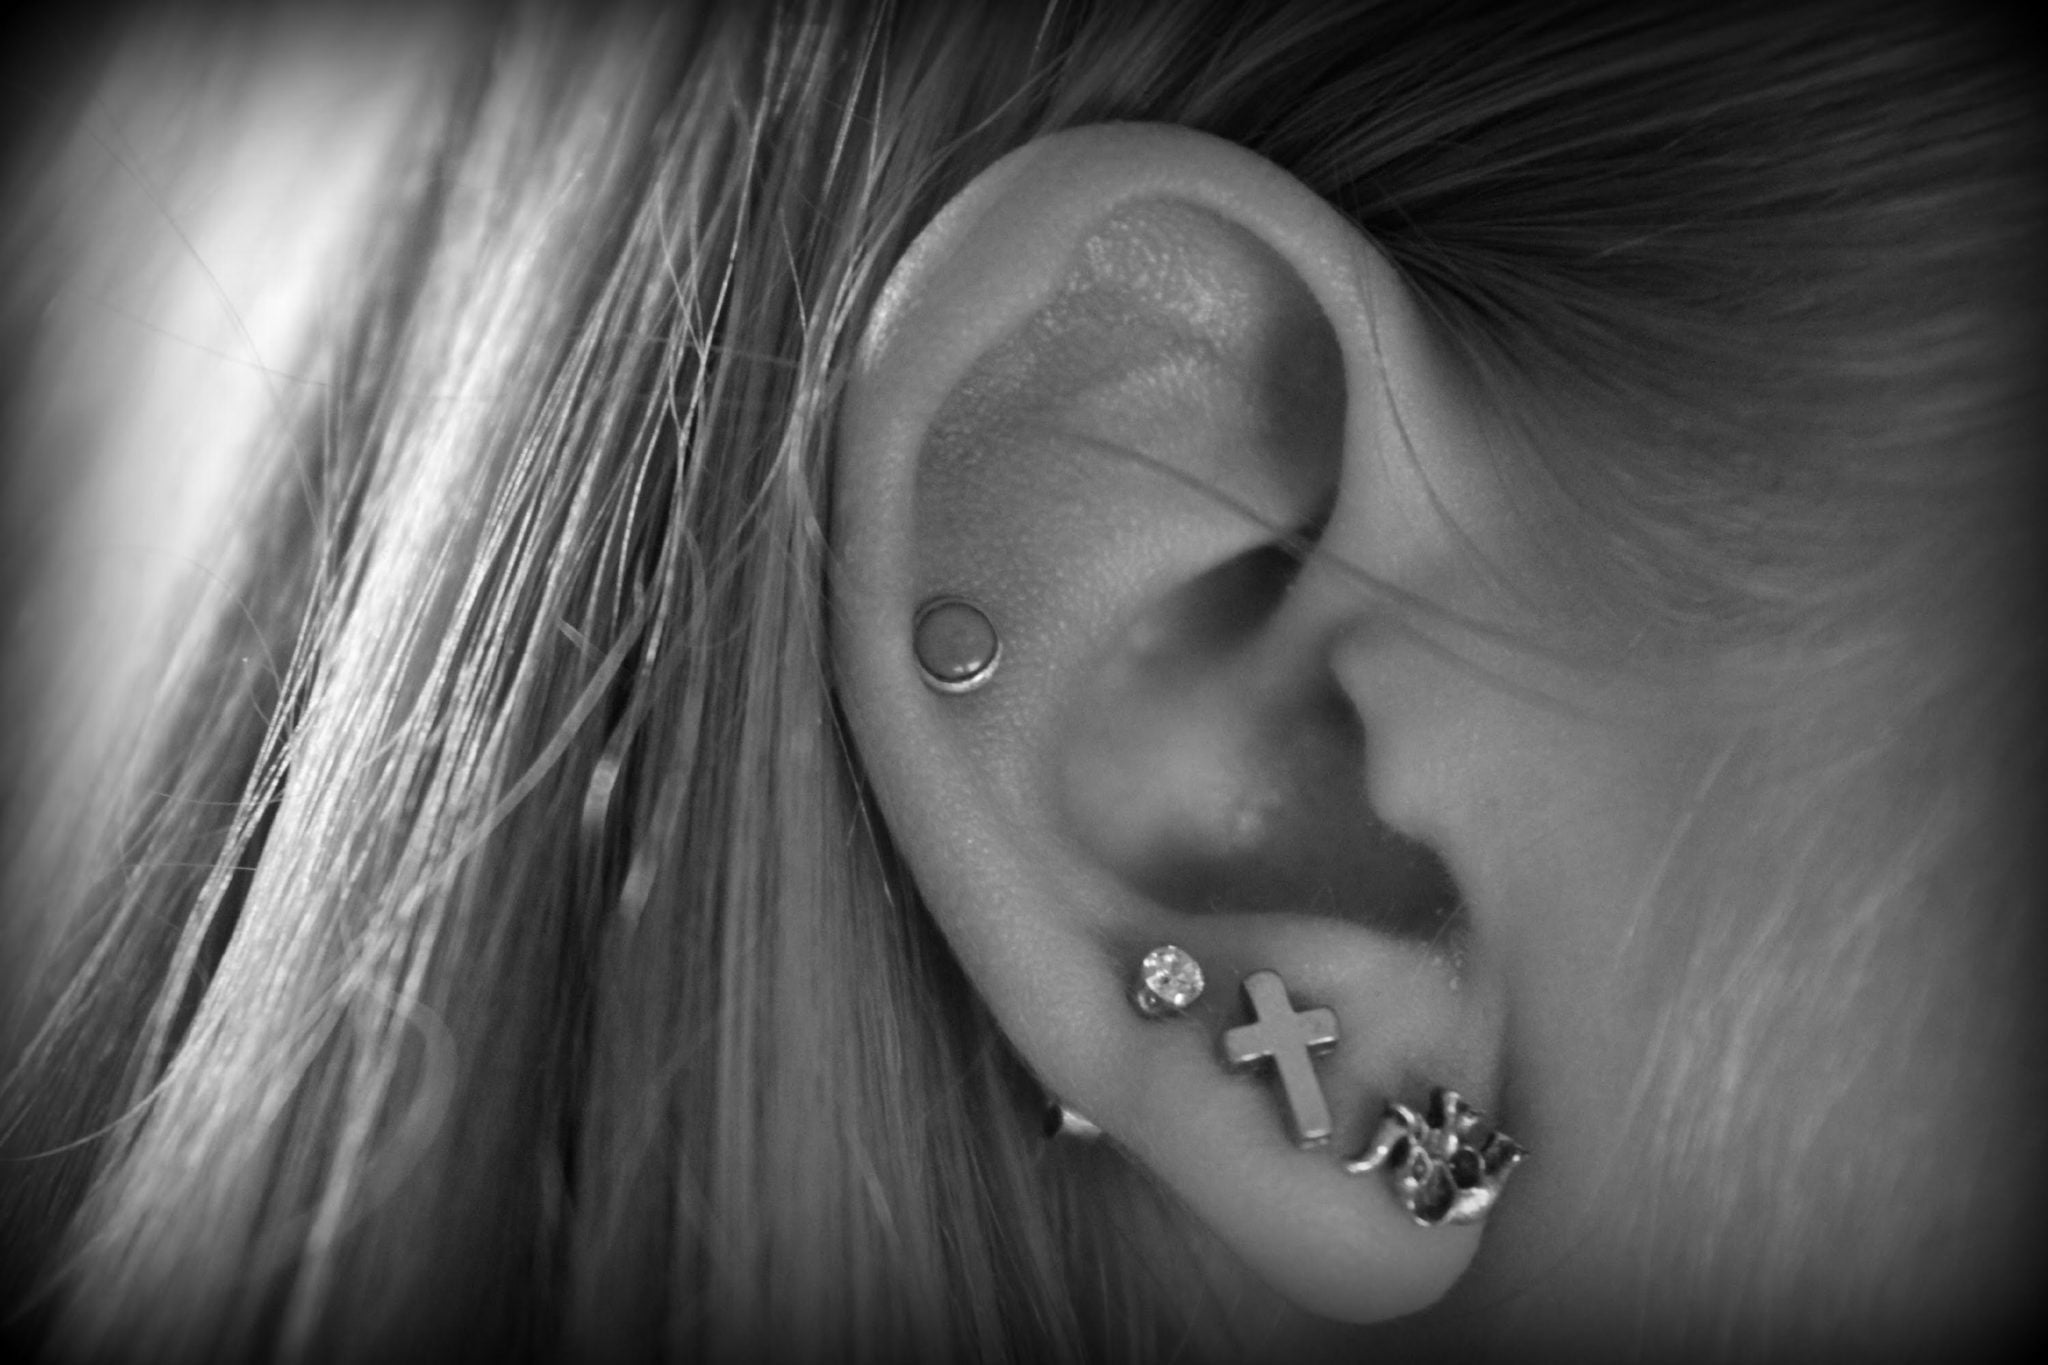 Ear Piercing: Ever Wondered Why Do We Pierce Our Ears?